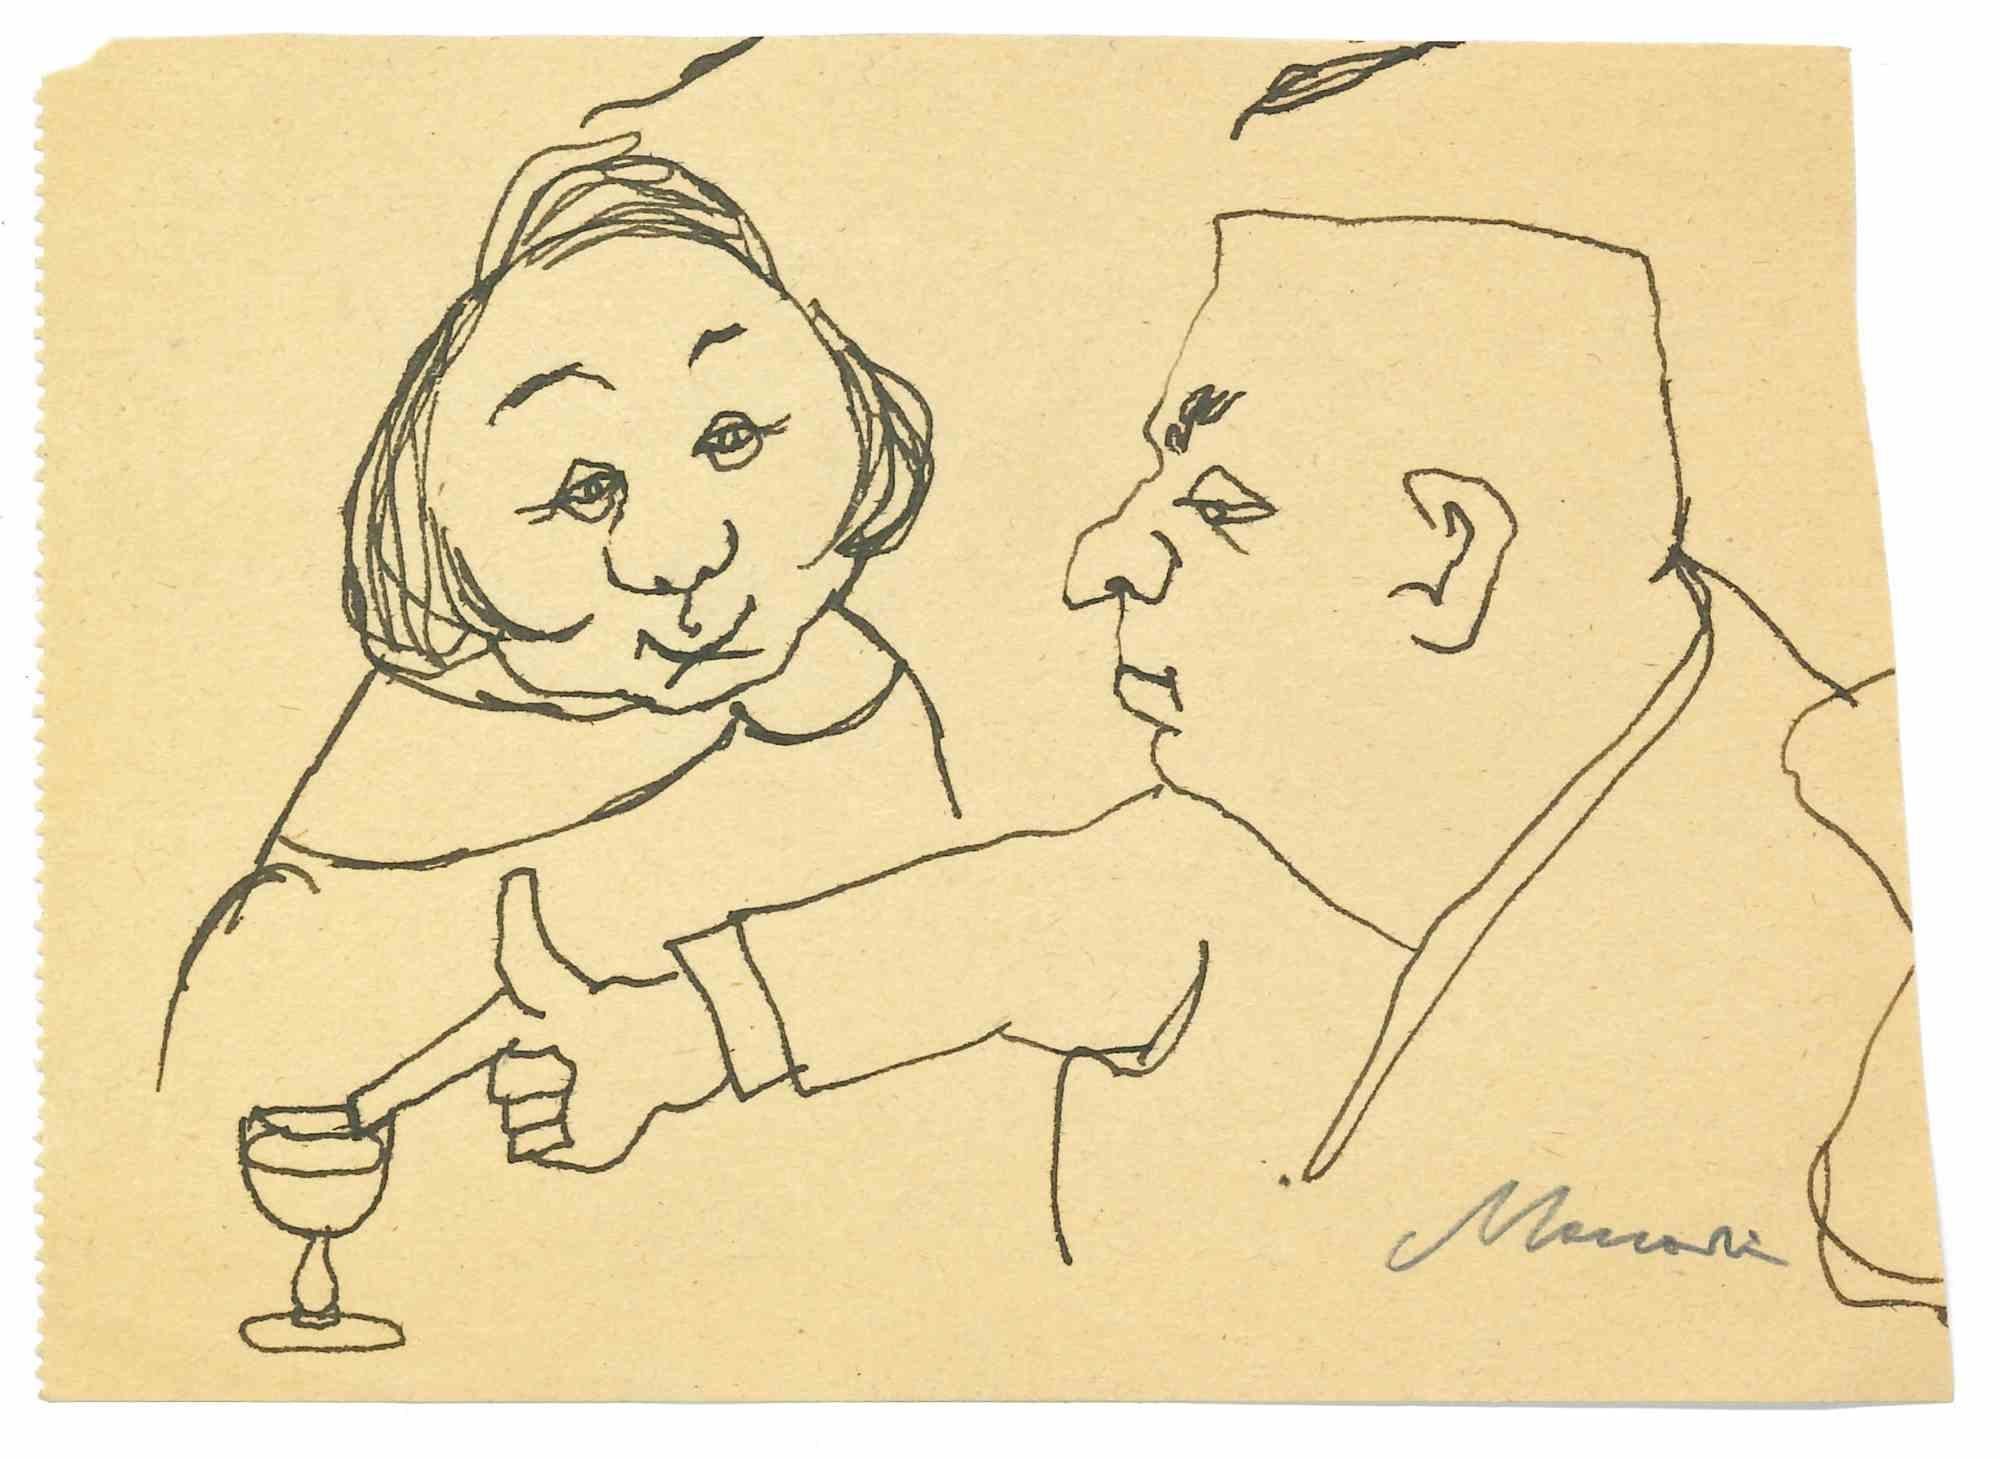 Drinking is a china ink drawing realized by Mino Maccari  (1924-1989) in the Mid-20th Century.

Hand-signed.

Good conditions with slight foxing.

Mino Maccari (Siena, 1924-Rome, June 16, 1989) was an Italian writer, painter, engraver and